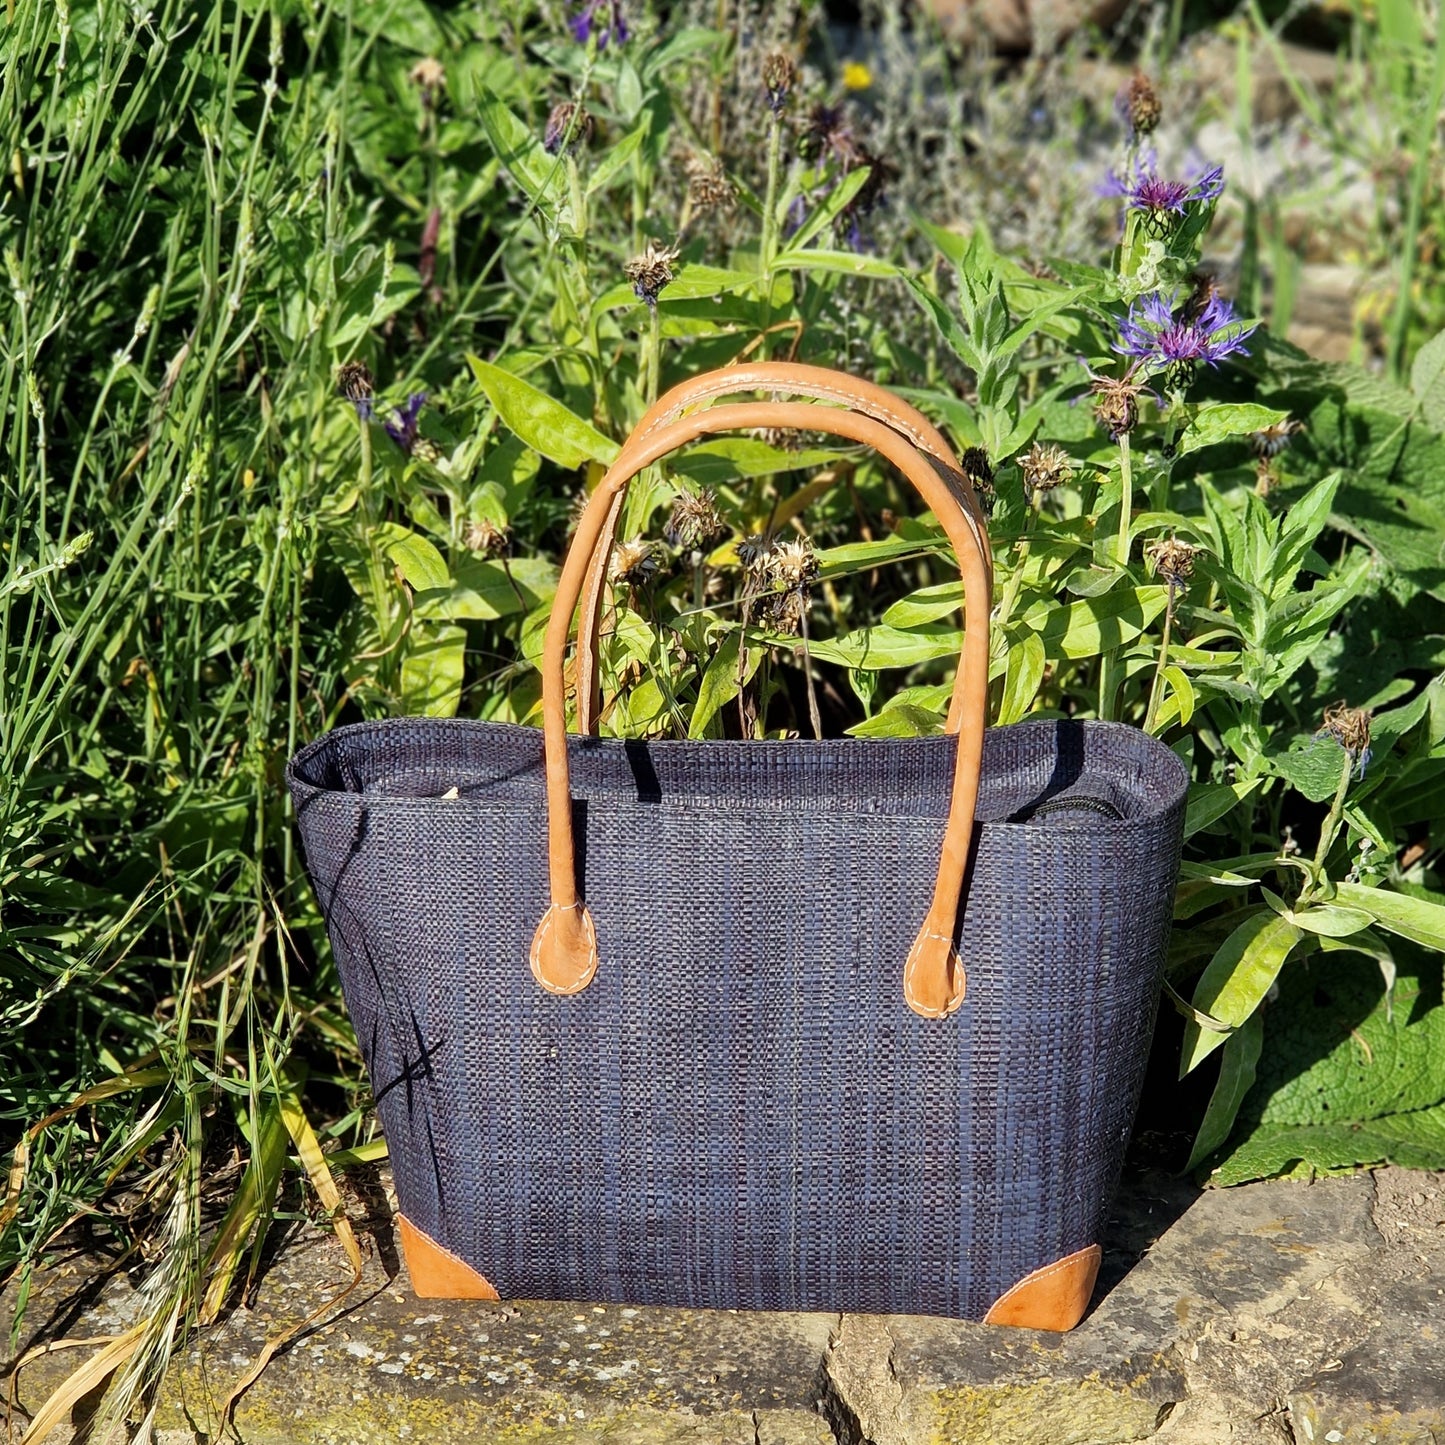 Black Raffia Basket with leather handles and a zip top.